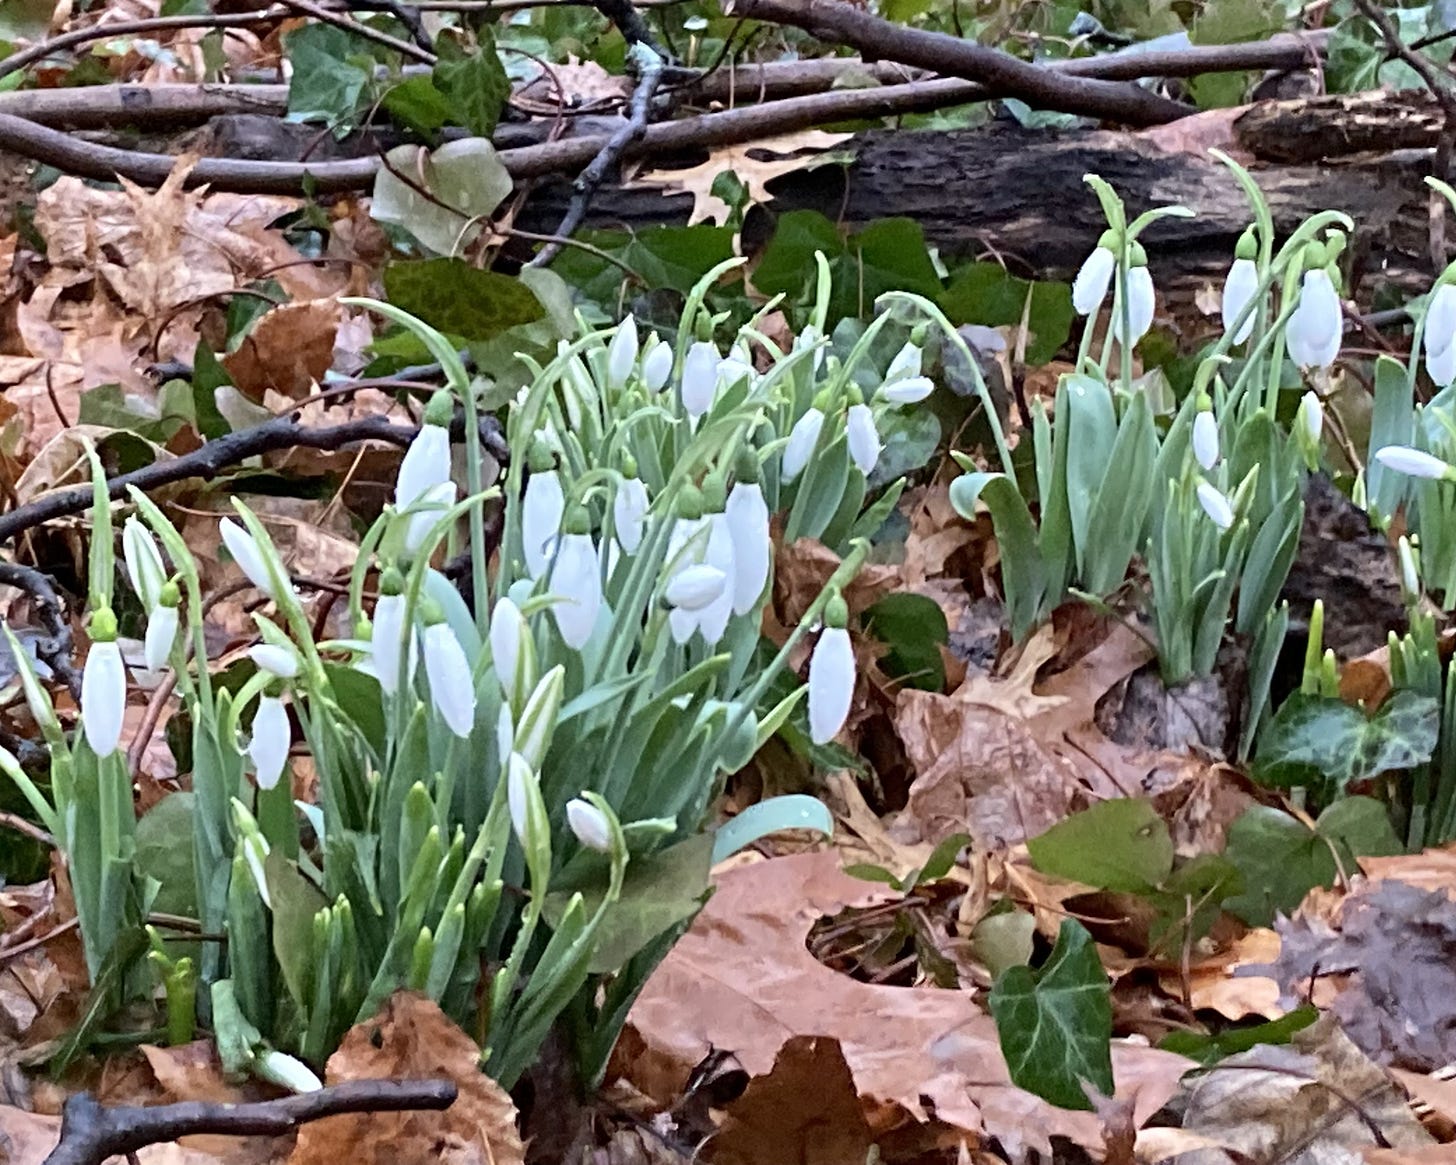 snowdrops blooming amid sticks and dead leaves